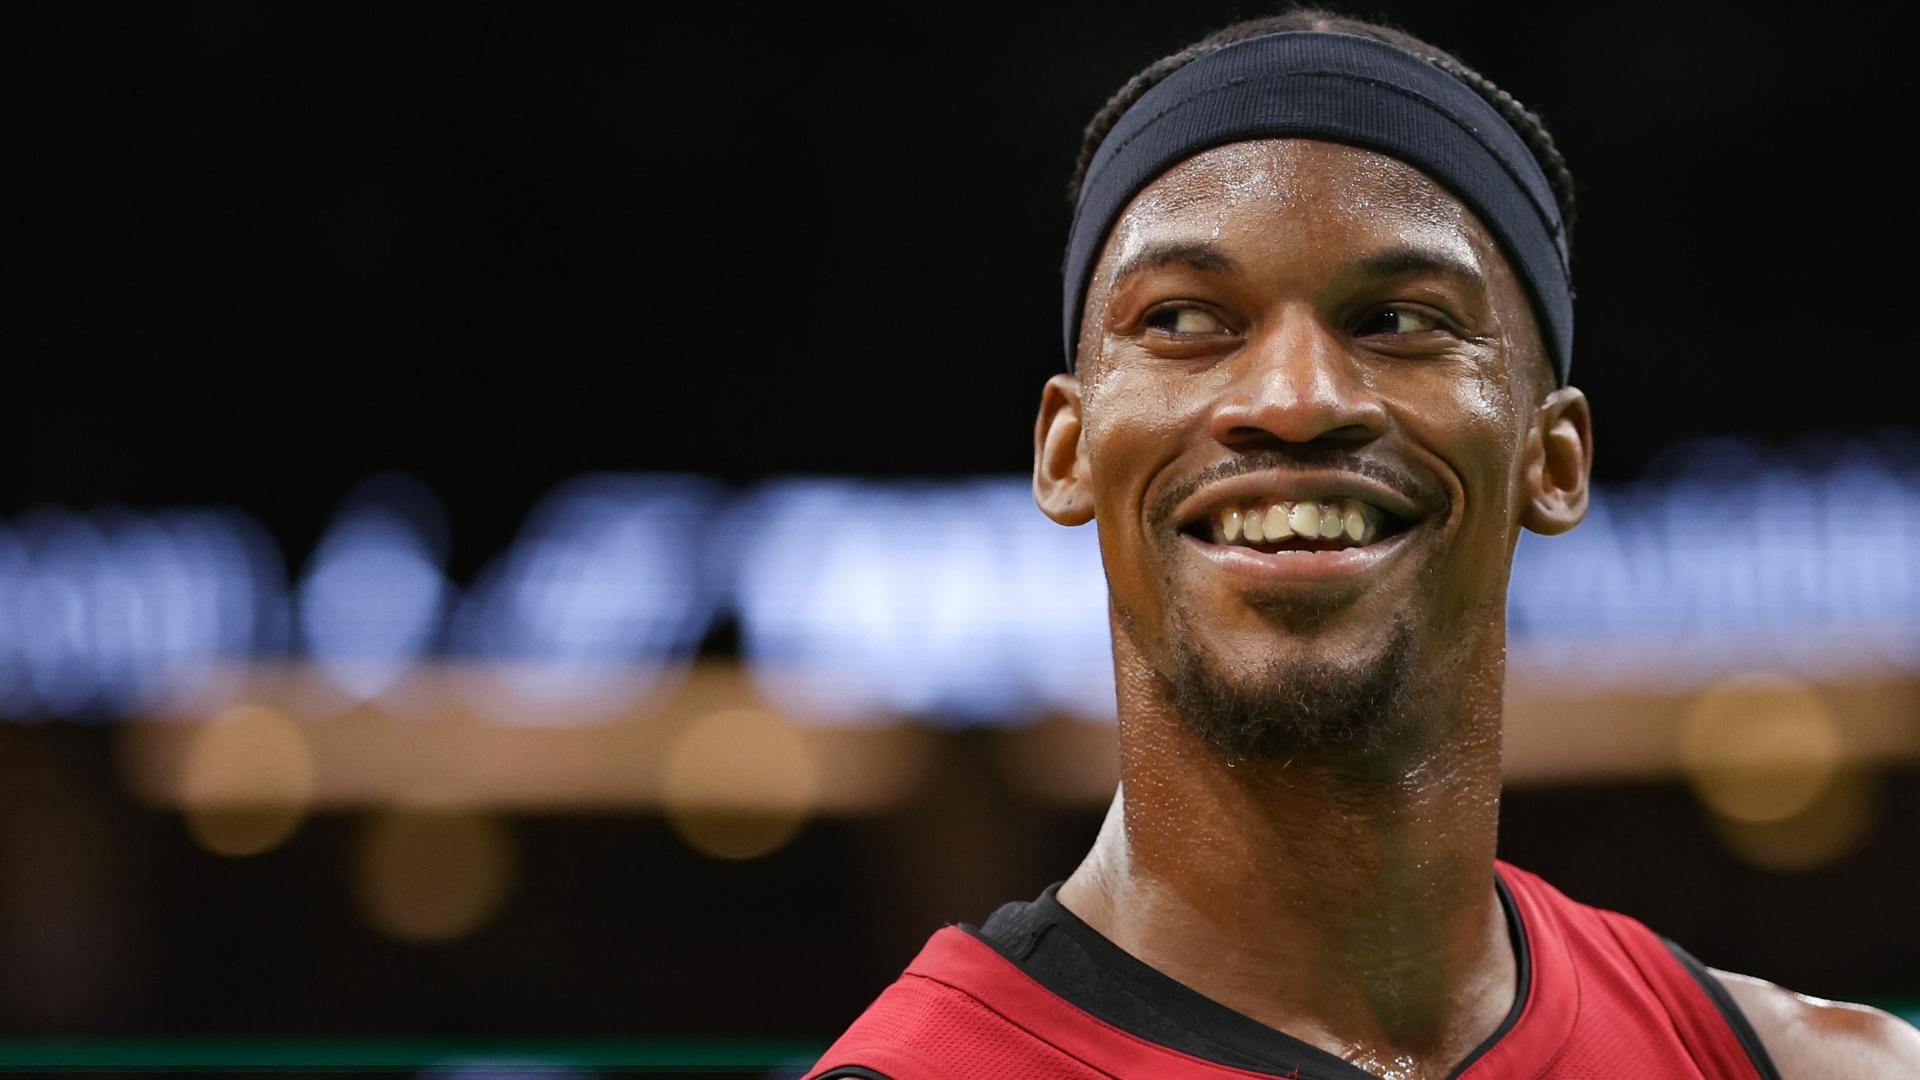 NBA Stats: Jimmy Butler is the NBA's most consistent player